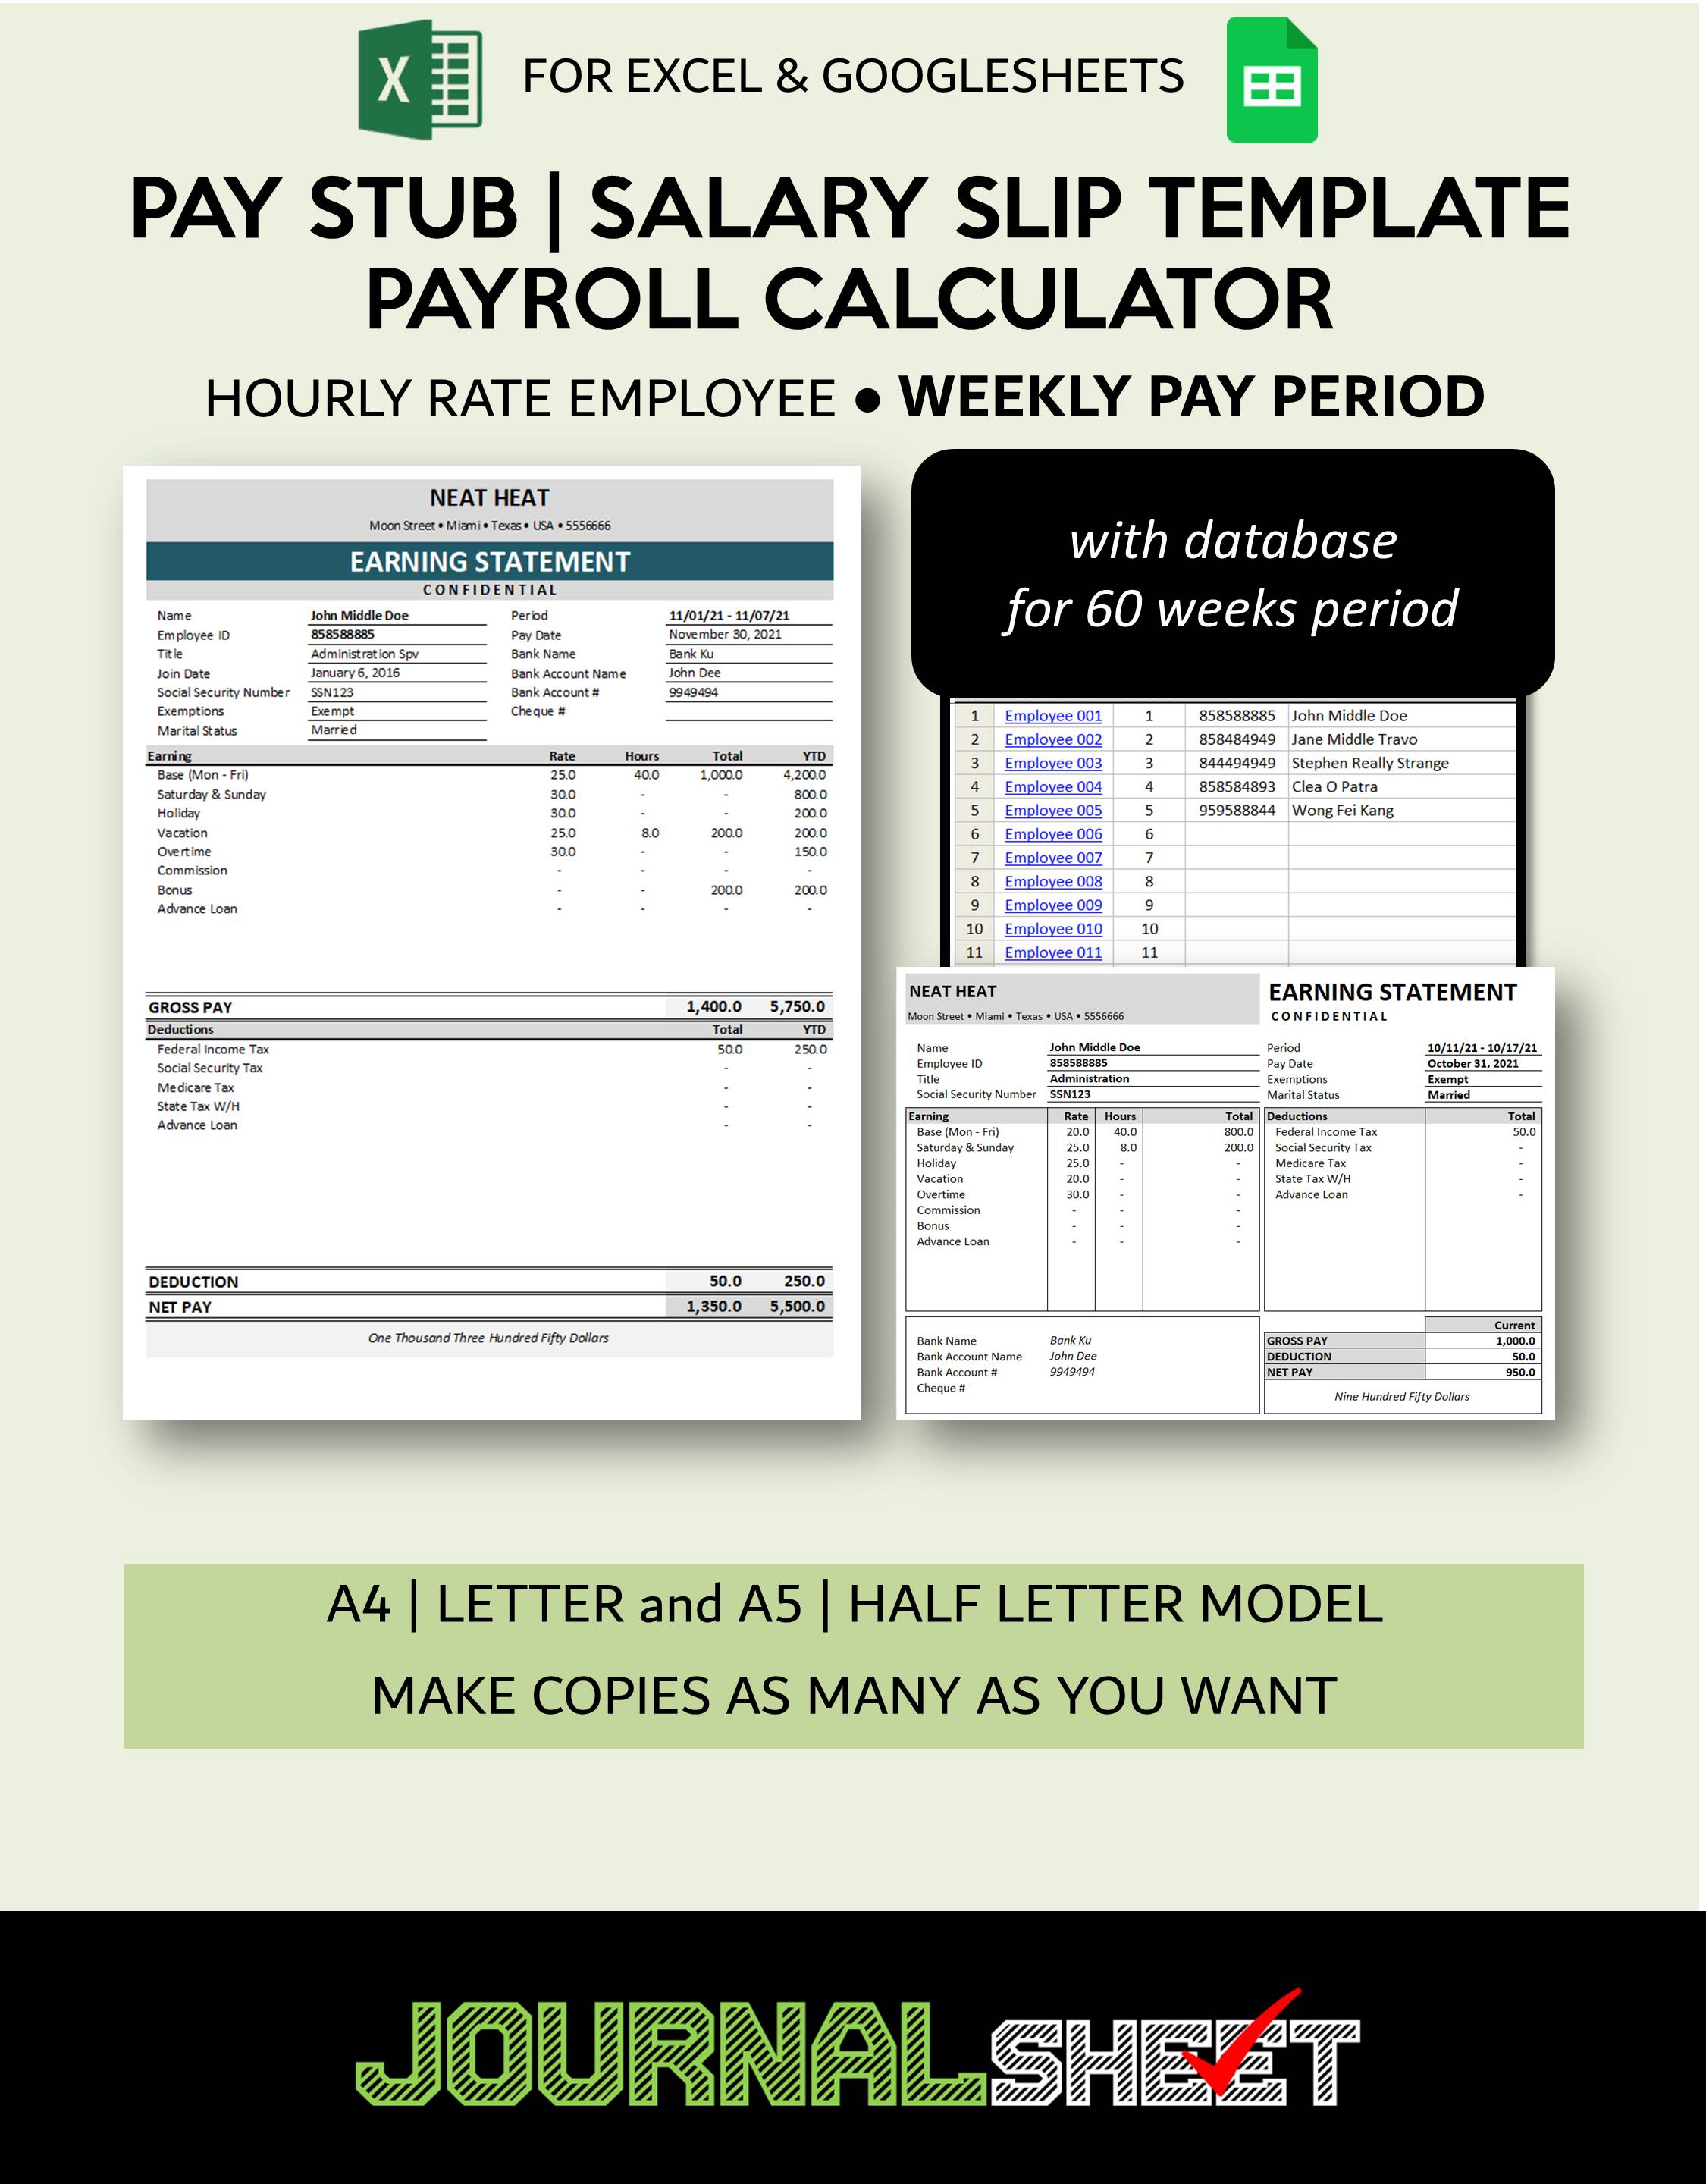 Pay Stub - Salary Slip Template - Hourly Rate - Weekly Payment Period